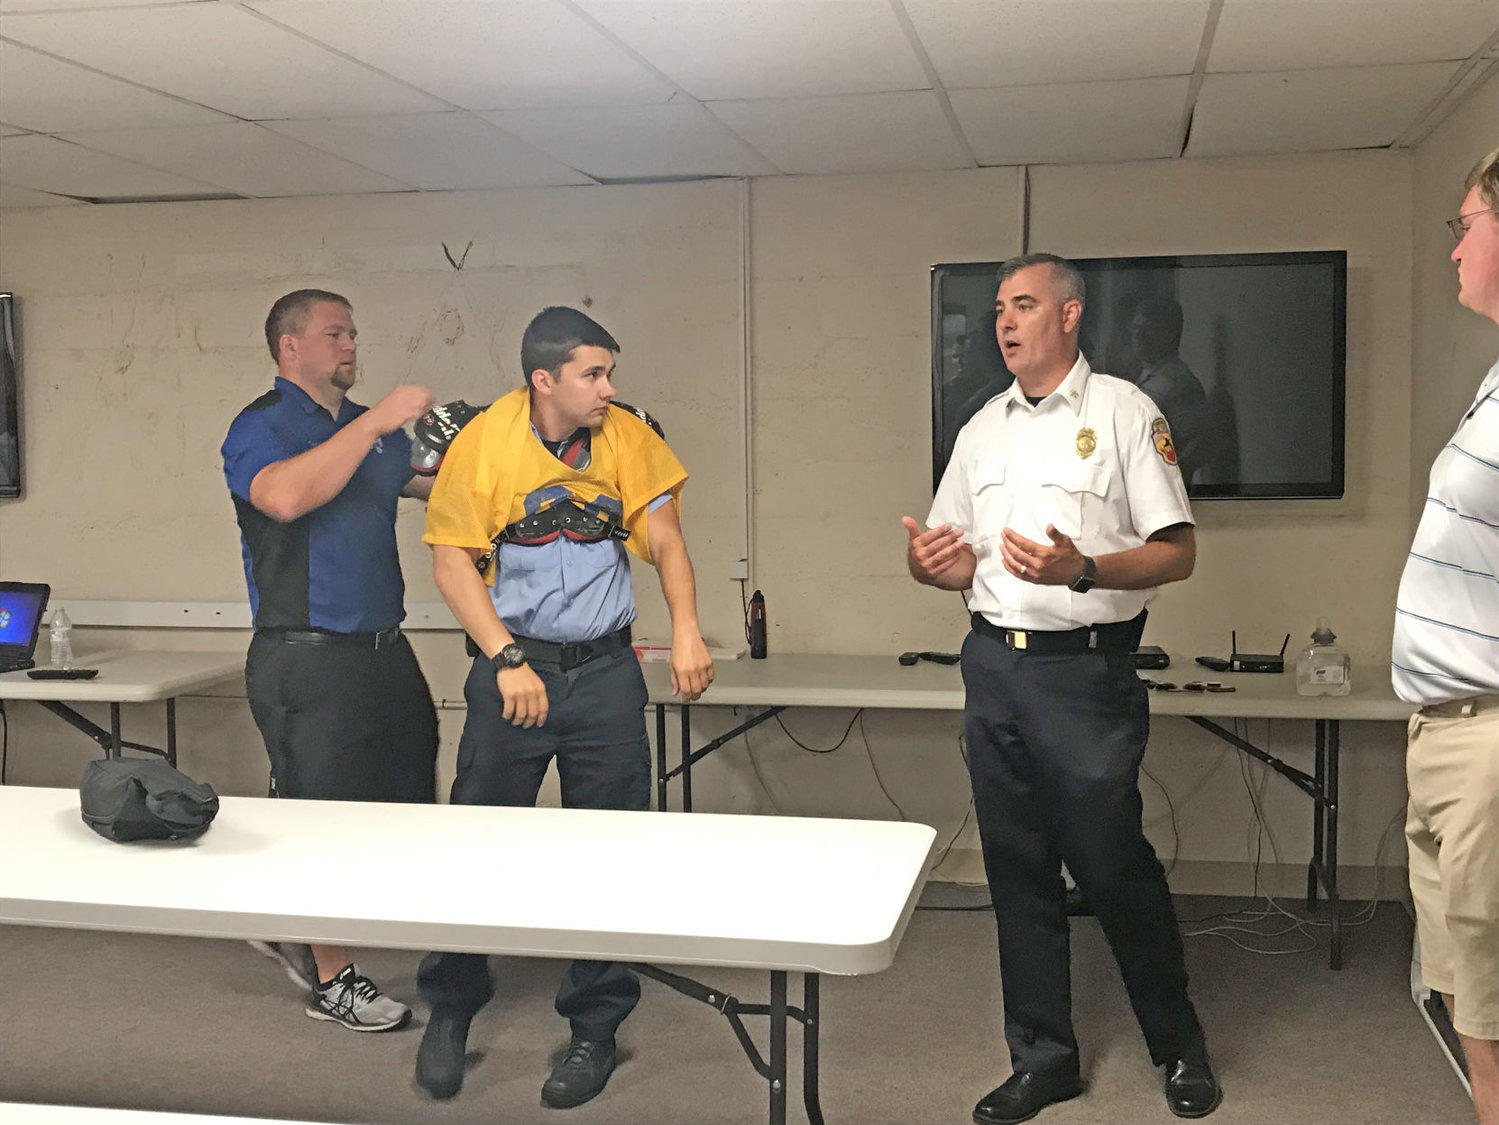 Paul Miller, the Division Chief of EMS for the Crawfordsville Fire Department, addresses medics during training Wednesday. Doug Horton (left), the Athletic Trainer at Crawfordsville High School, talked to medics about how athletic trainers care of injured athletes. Also pictured is Nathaniel Busenbark (center), a Crawfordsville firefighter/paramedic.